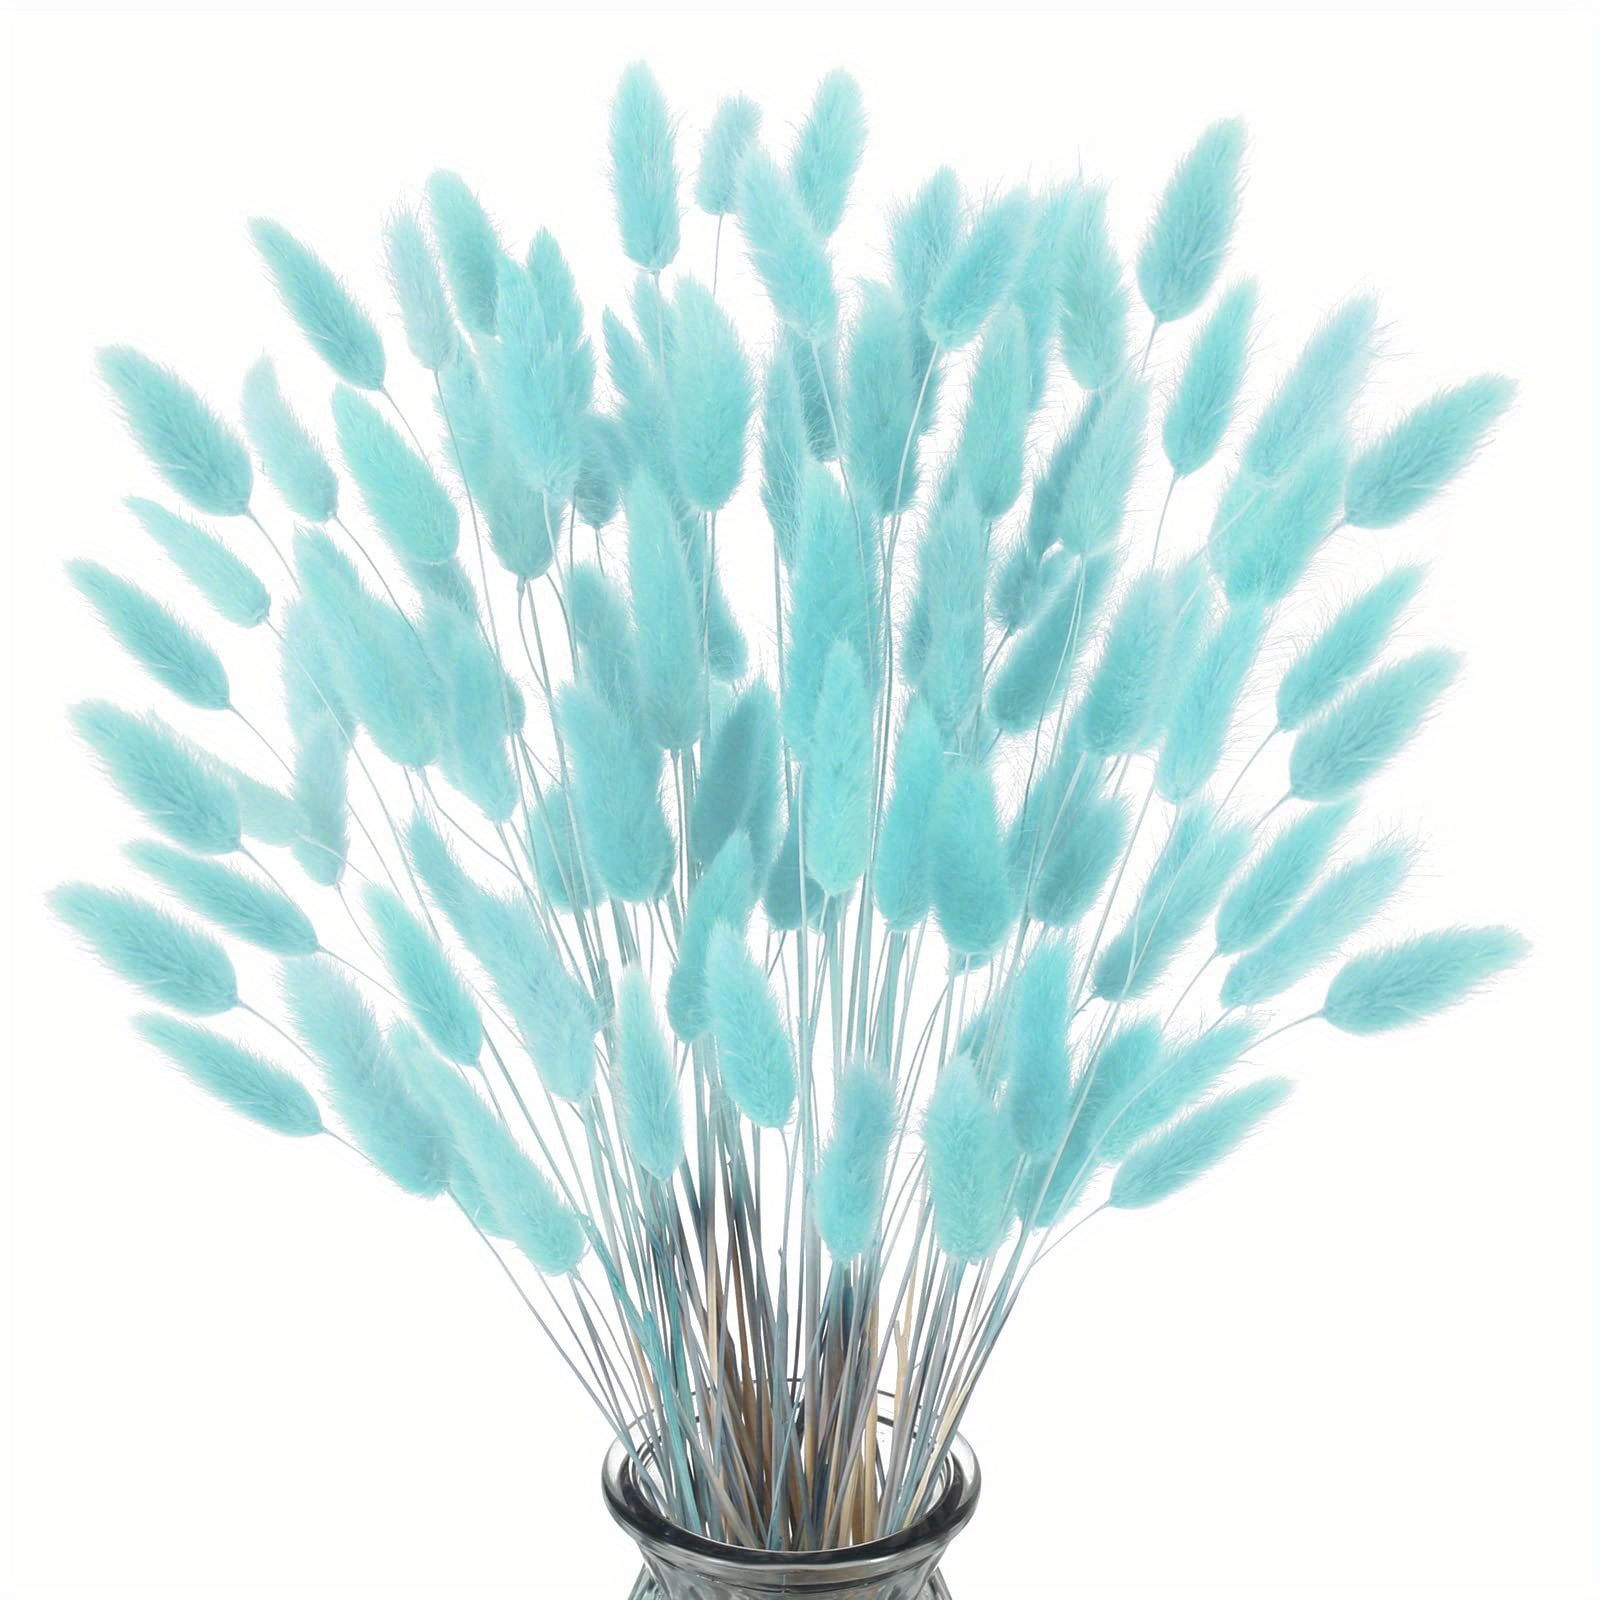 

60/120pcs Light Blue Lagurus, Bunny Tails Dried Flowers Boho Home Decor, Flower Arrangement Pampas Grass Wedding Table Decor Valentine's Day (it Has Been Processed And Poses No Pest Risk)